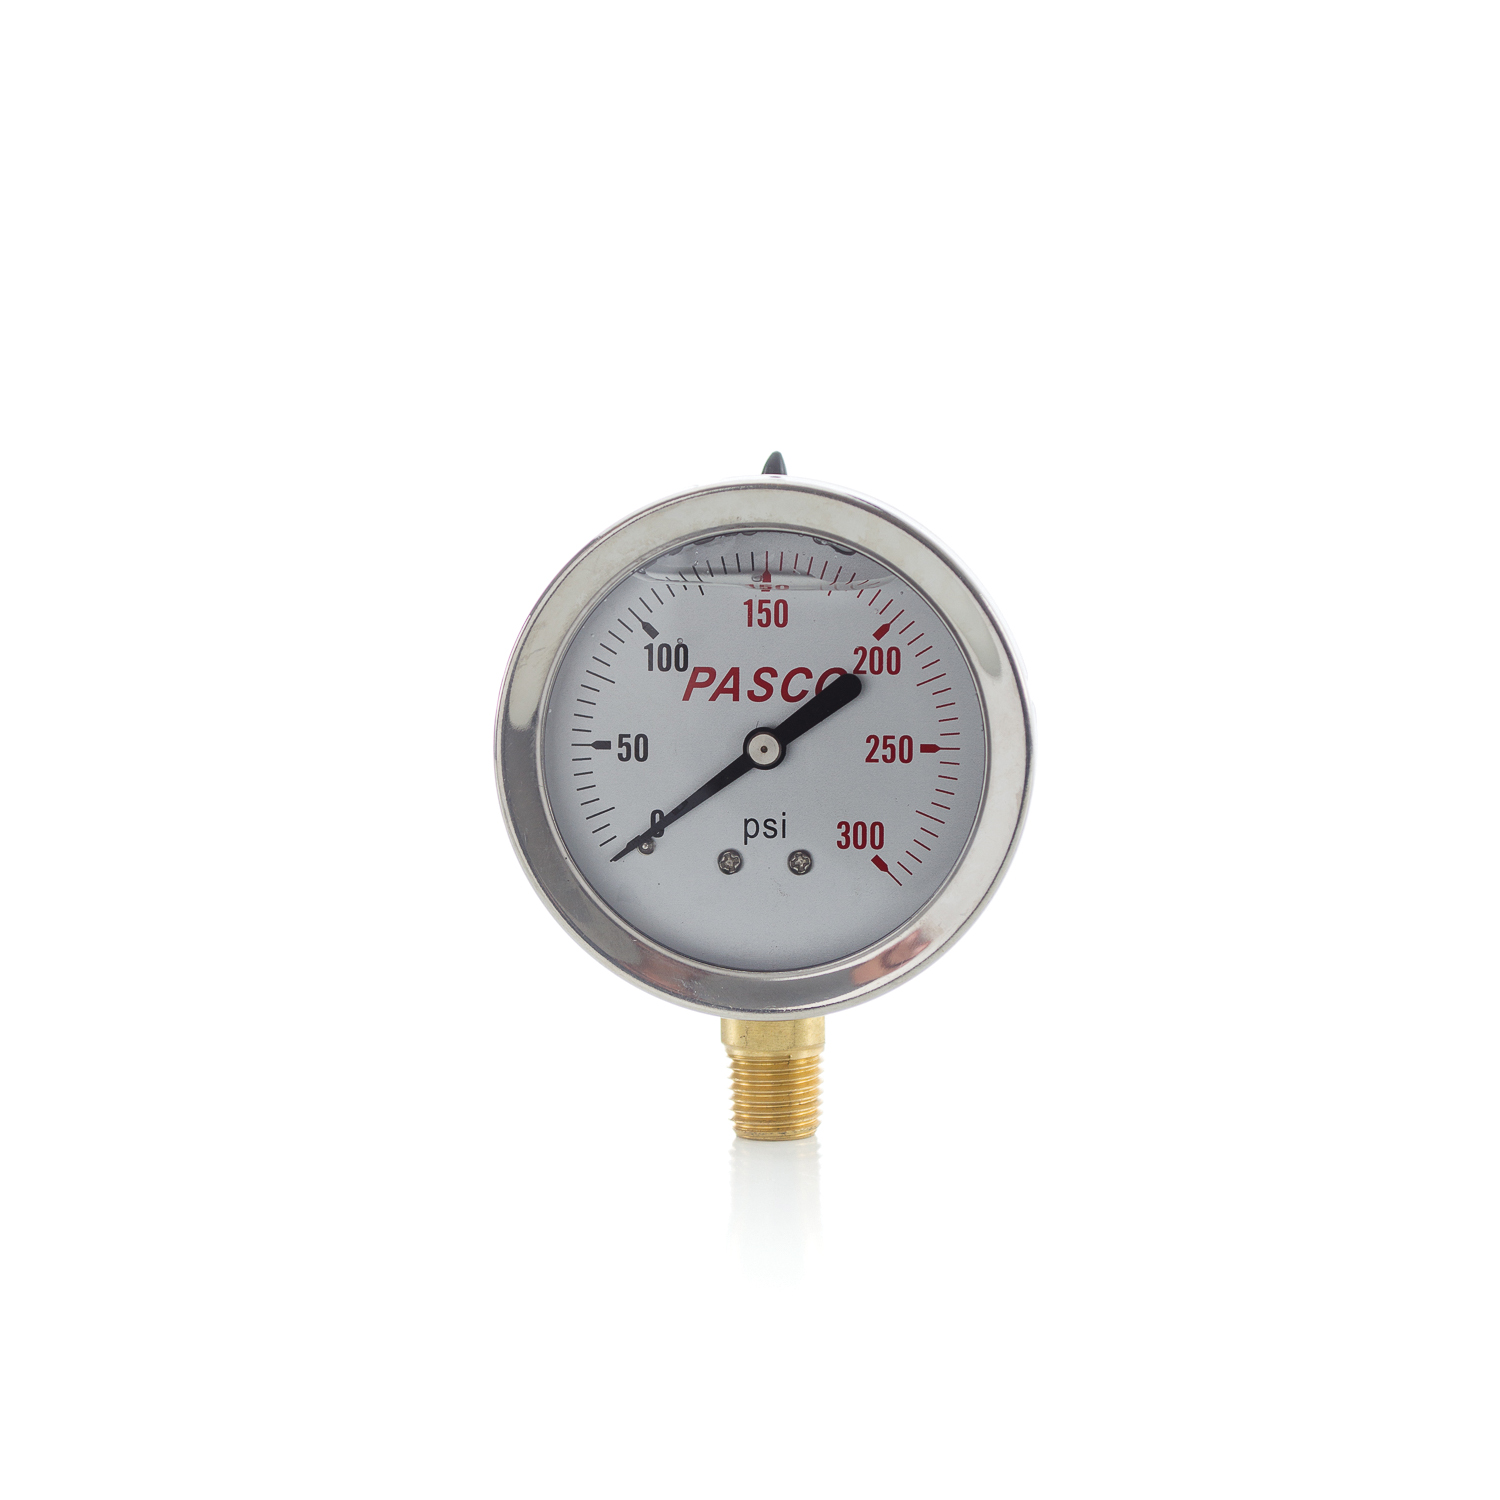 PASCO 1777 Pressure Gauge, 0 to 300 psi, 1/4 in MNPT Connection, 2-1/2 in Dial, +/- 3-2-3 %